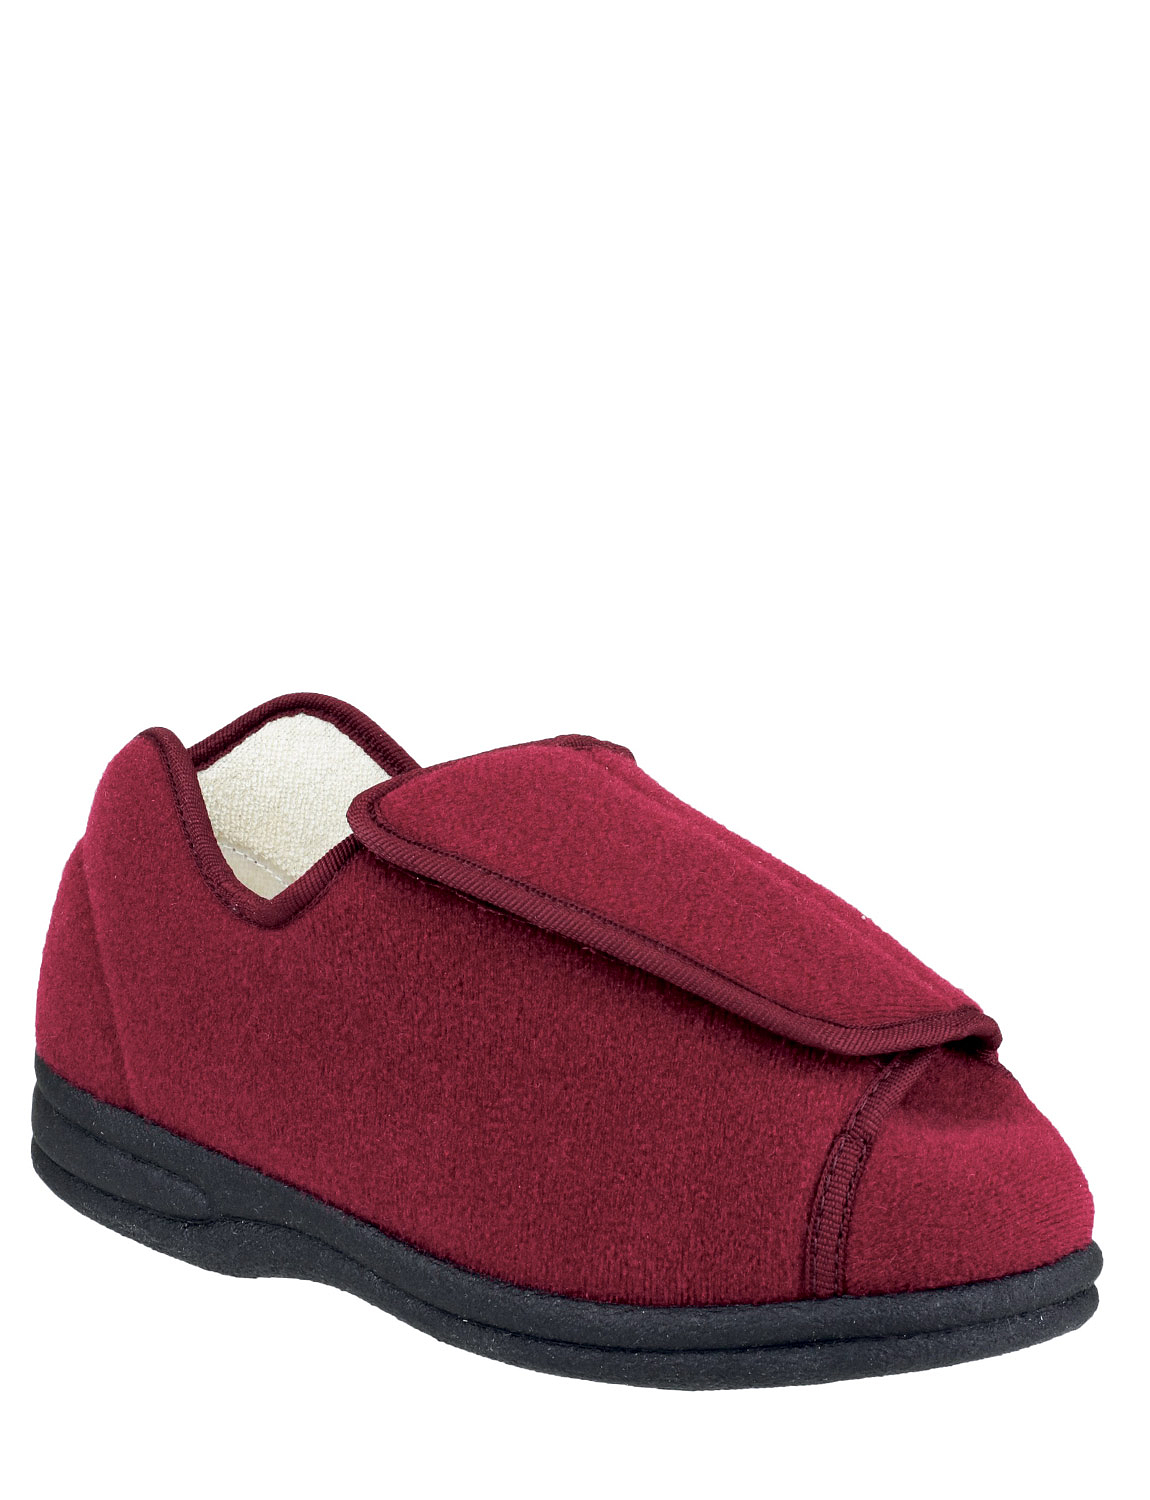 Ladies Fife Touch Fastening Slipper | Chums